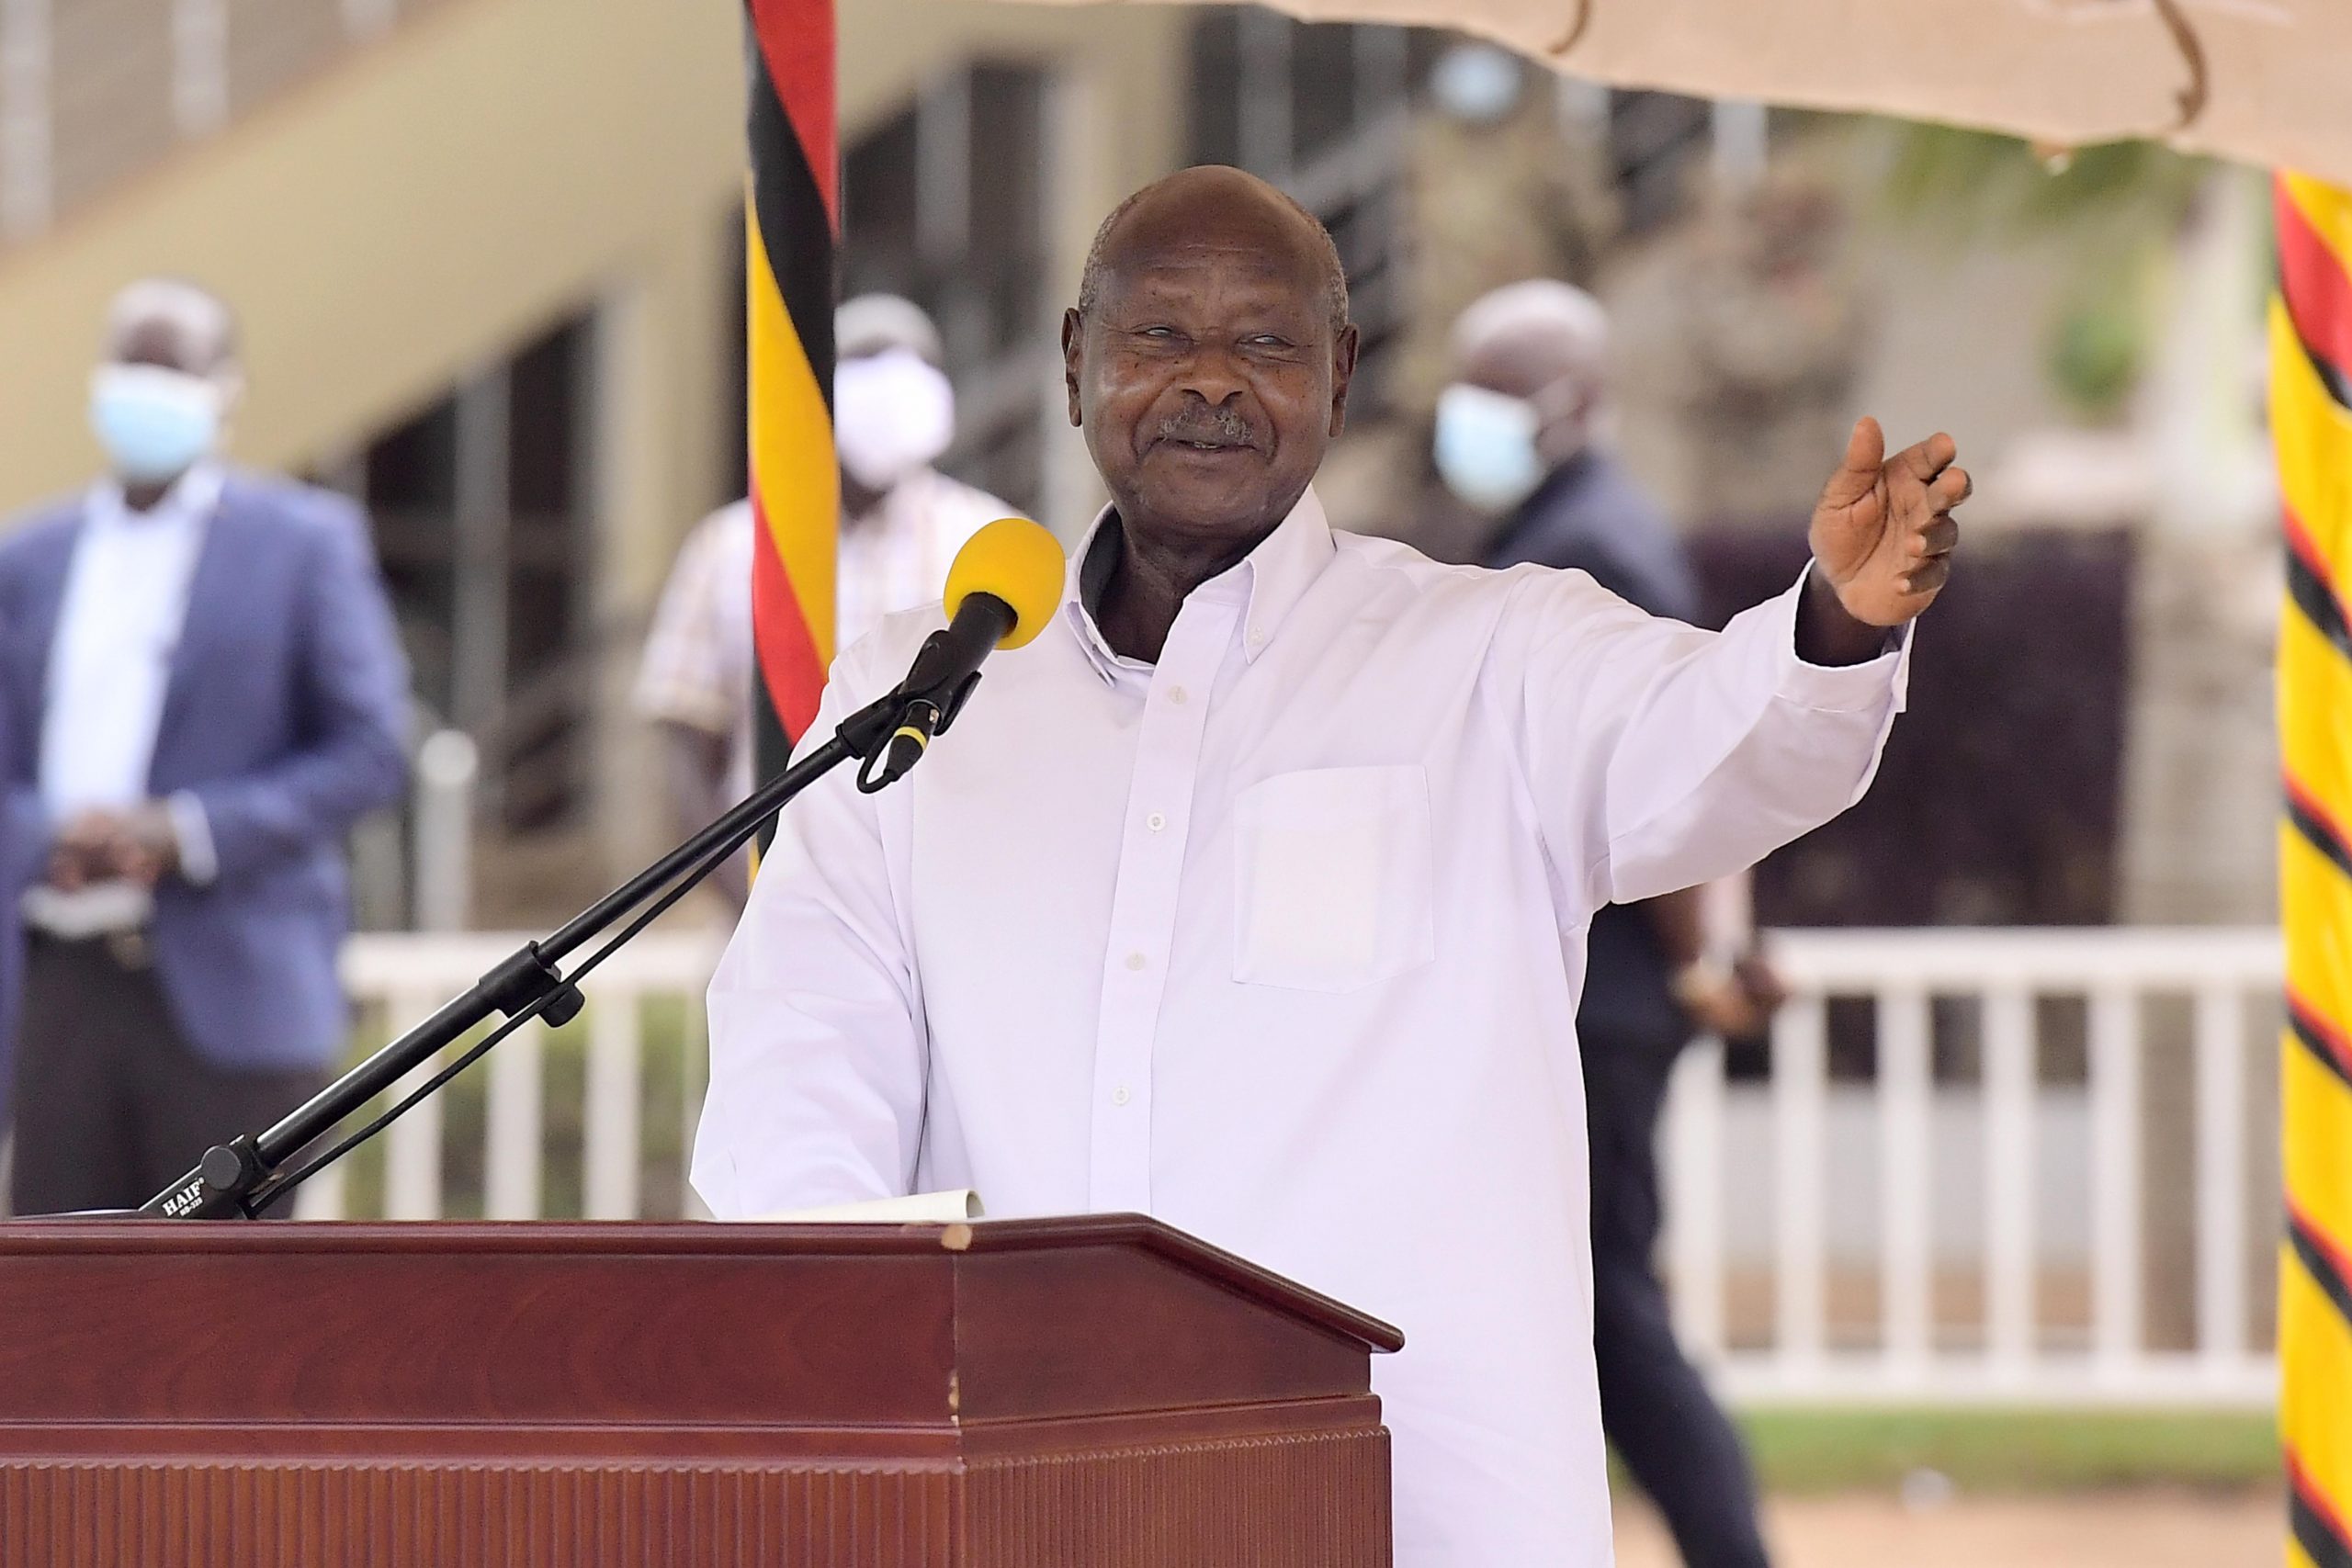 Traders Walkout On President Museveni In Their Meeting At Kololo.